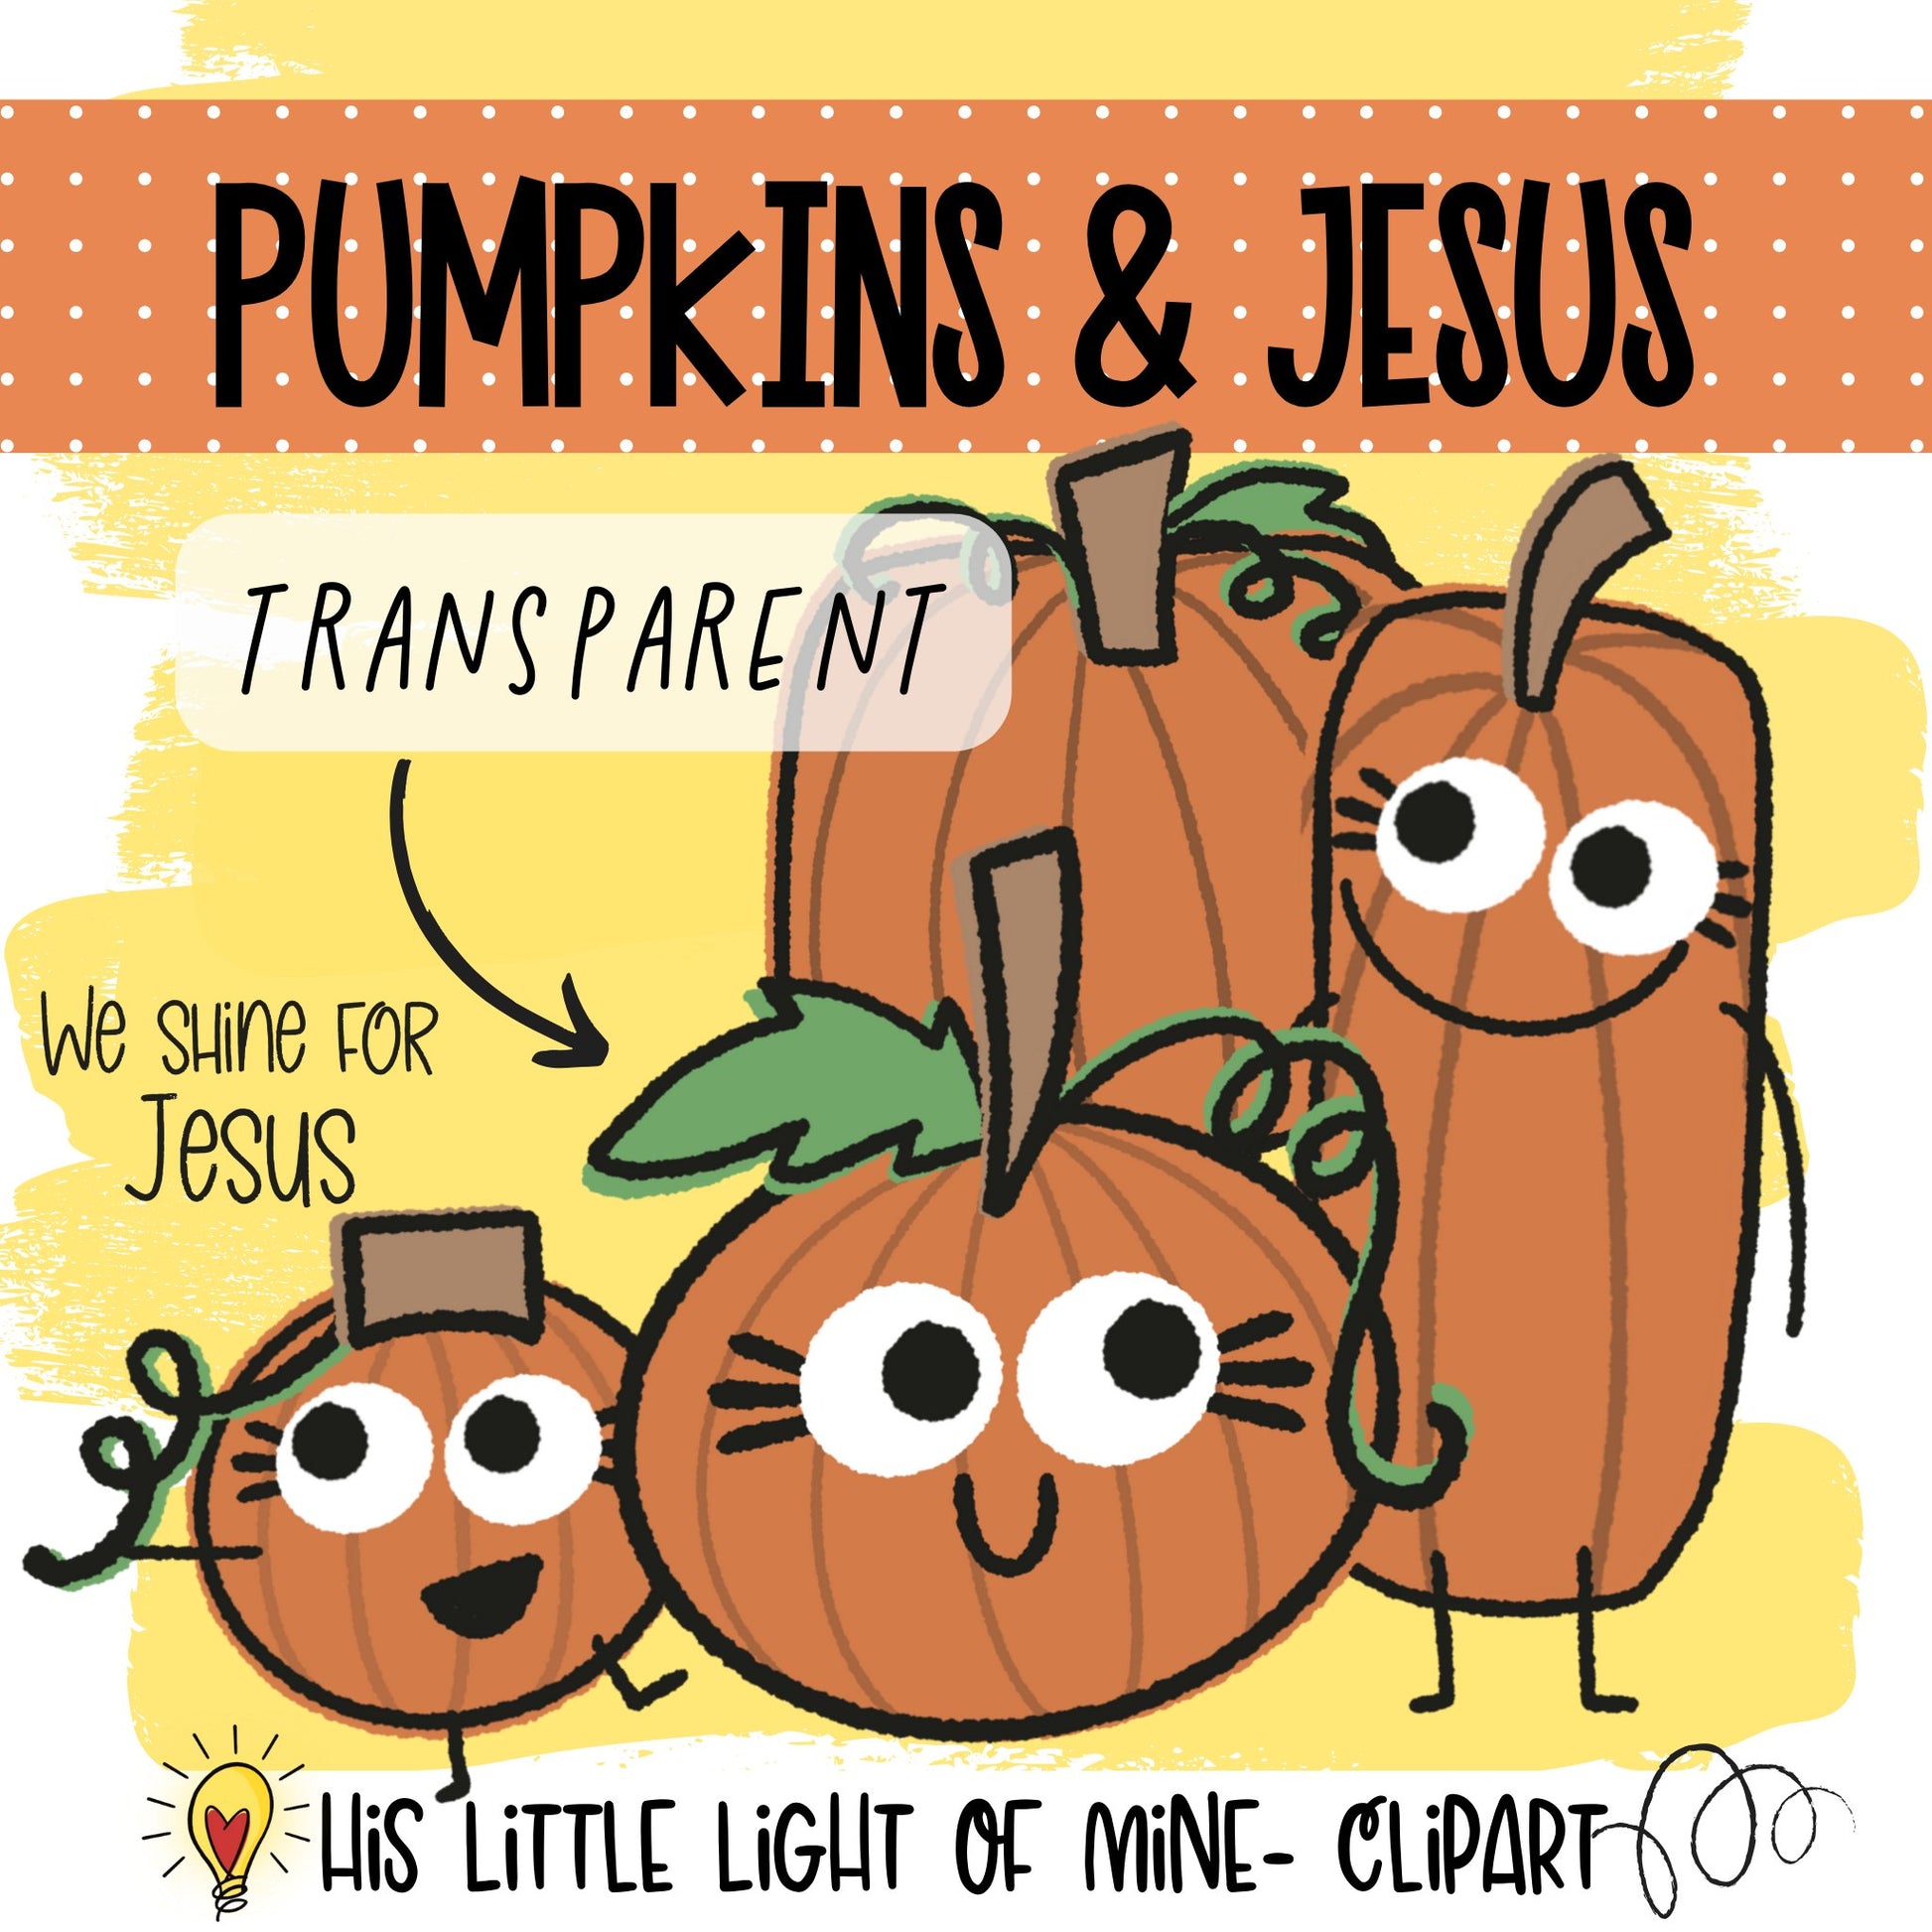 Pumpkins and Jesus clip art pack by a self-published illustrator featuring example pumpkins and phrases with transparent backgrounds